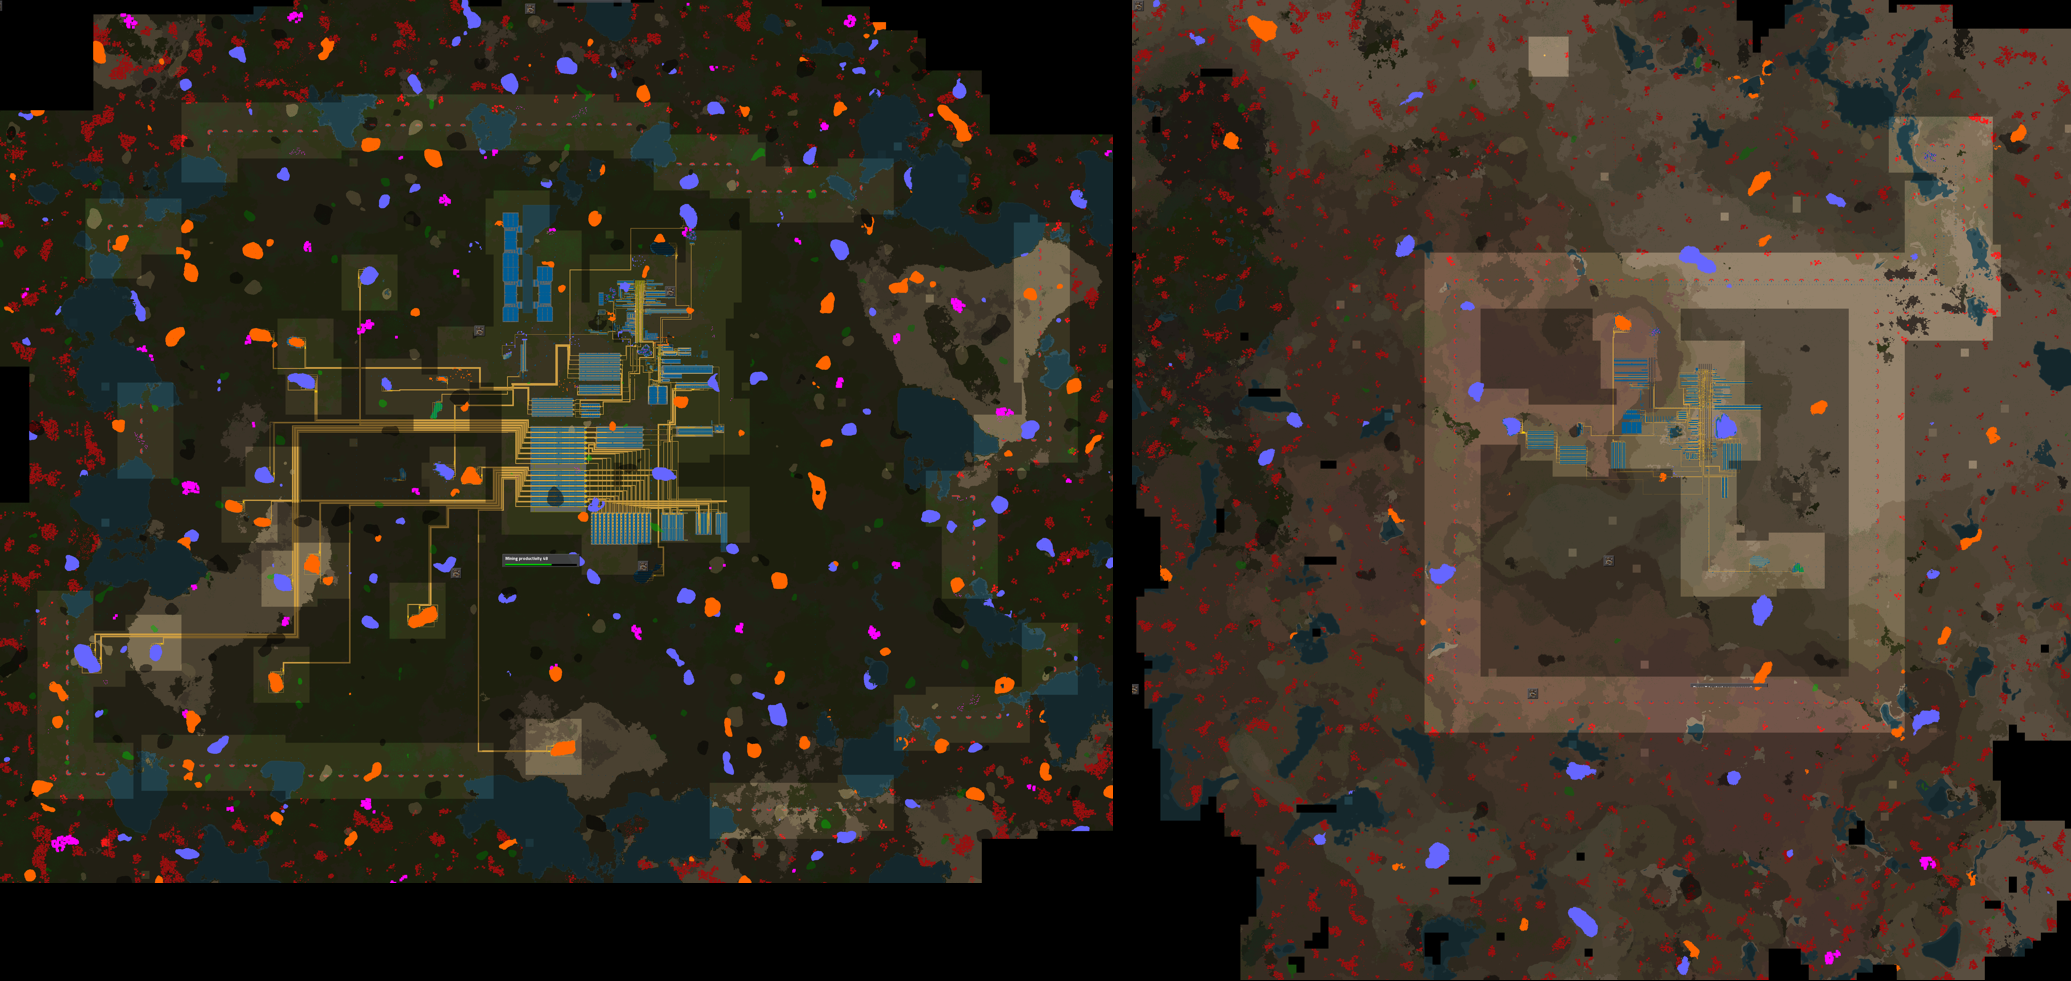 Two maps